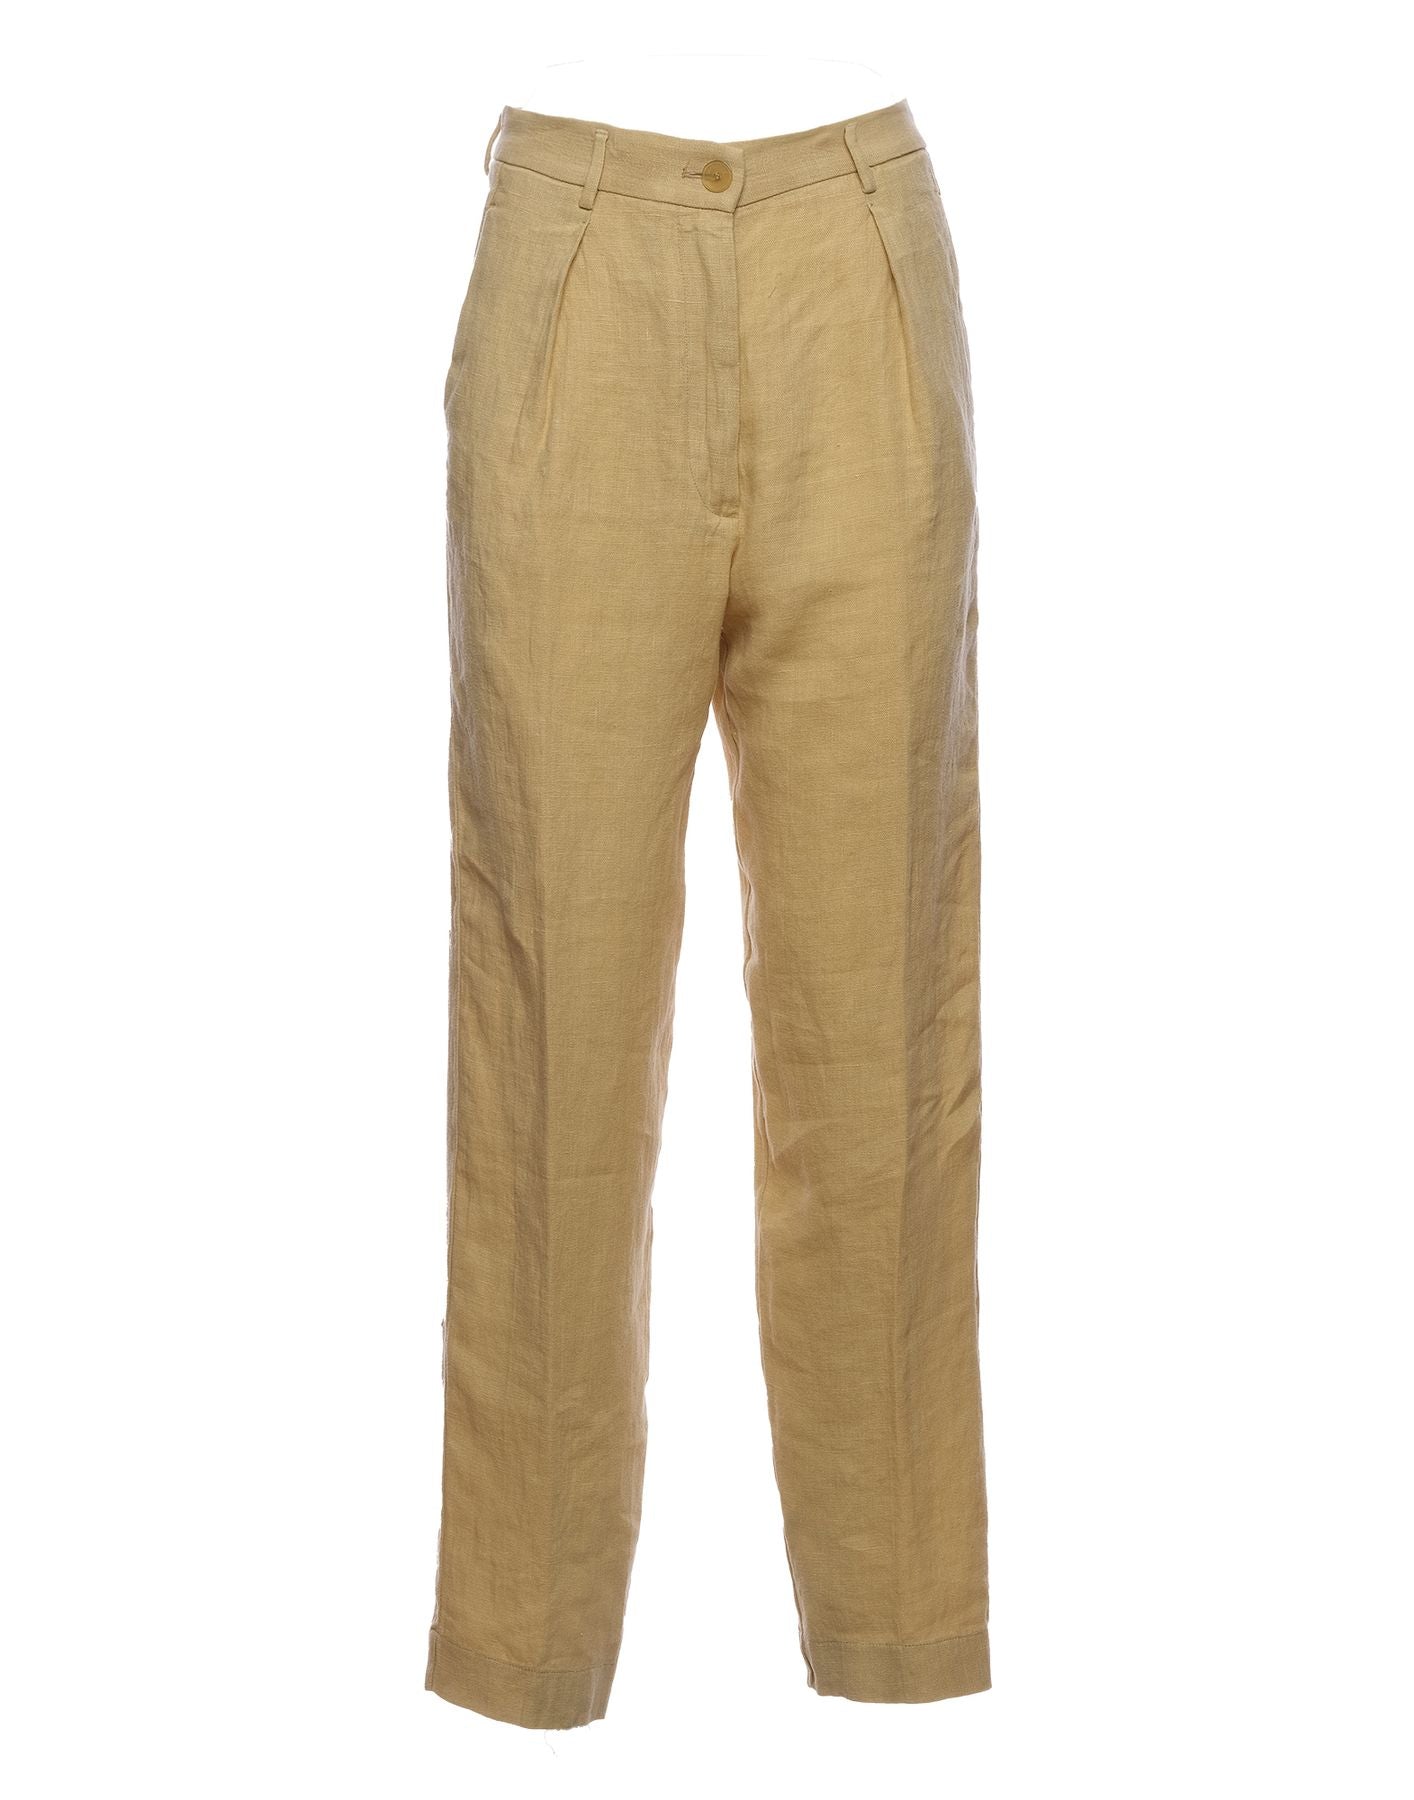 Pants for woman 10314 MY PANTS GOLD FORTE_FORTE